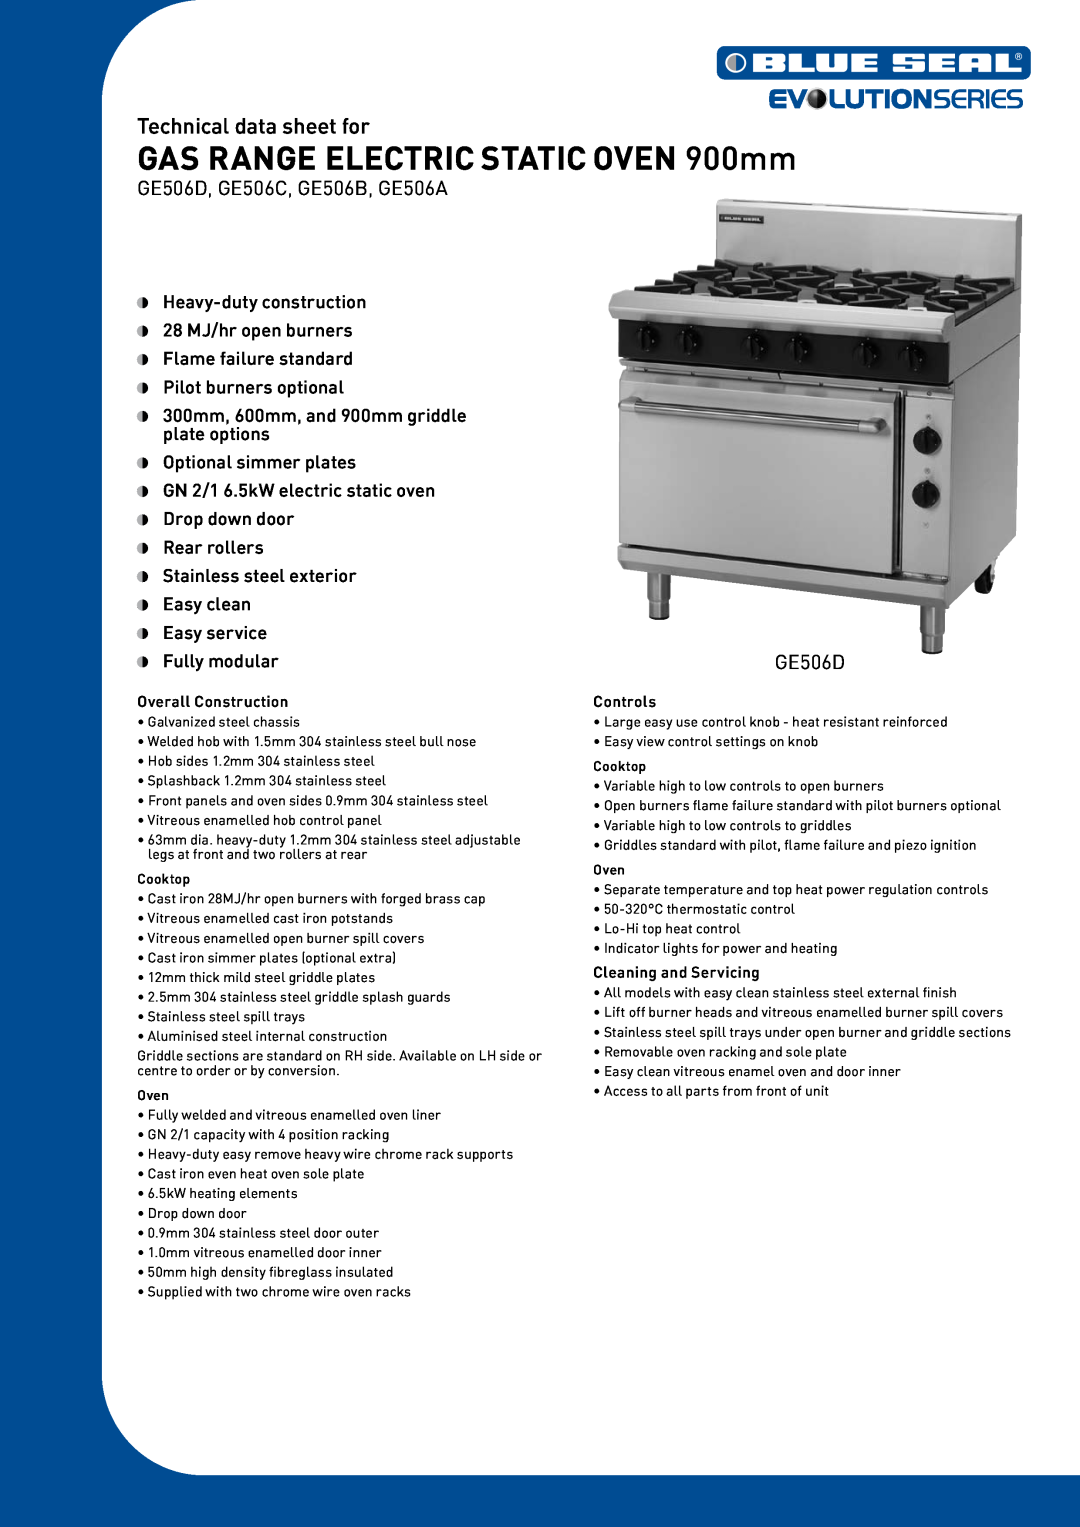 Moffat manual GAS RANGE ELECTRIC STATIC OVEN 900mm, Technical data sheet for, GE506D, GE506C, GE506B, GE506A 